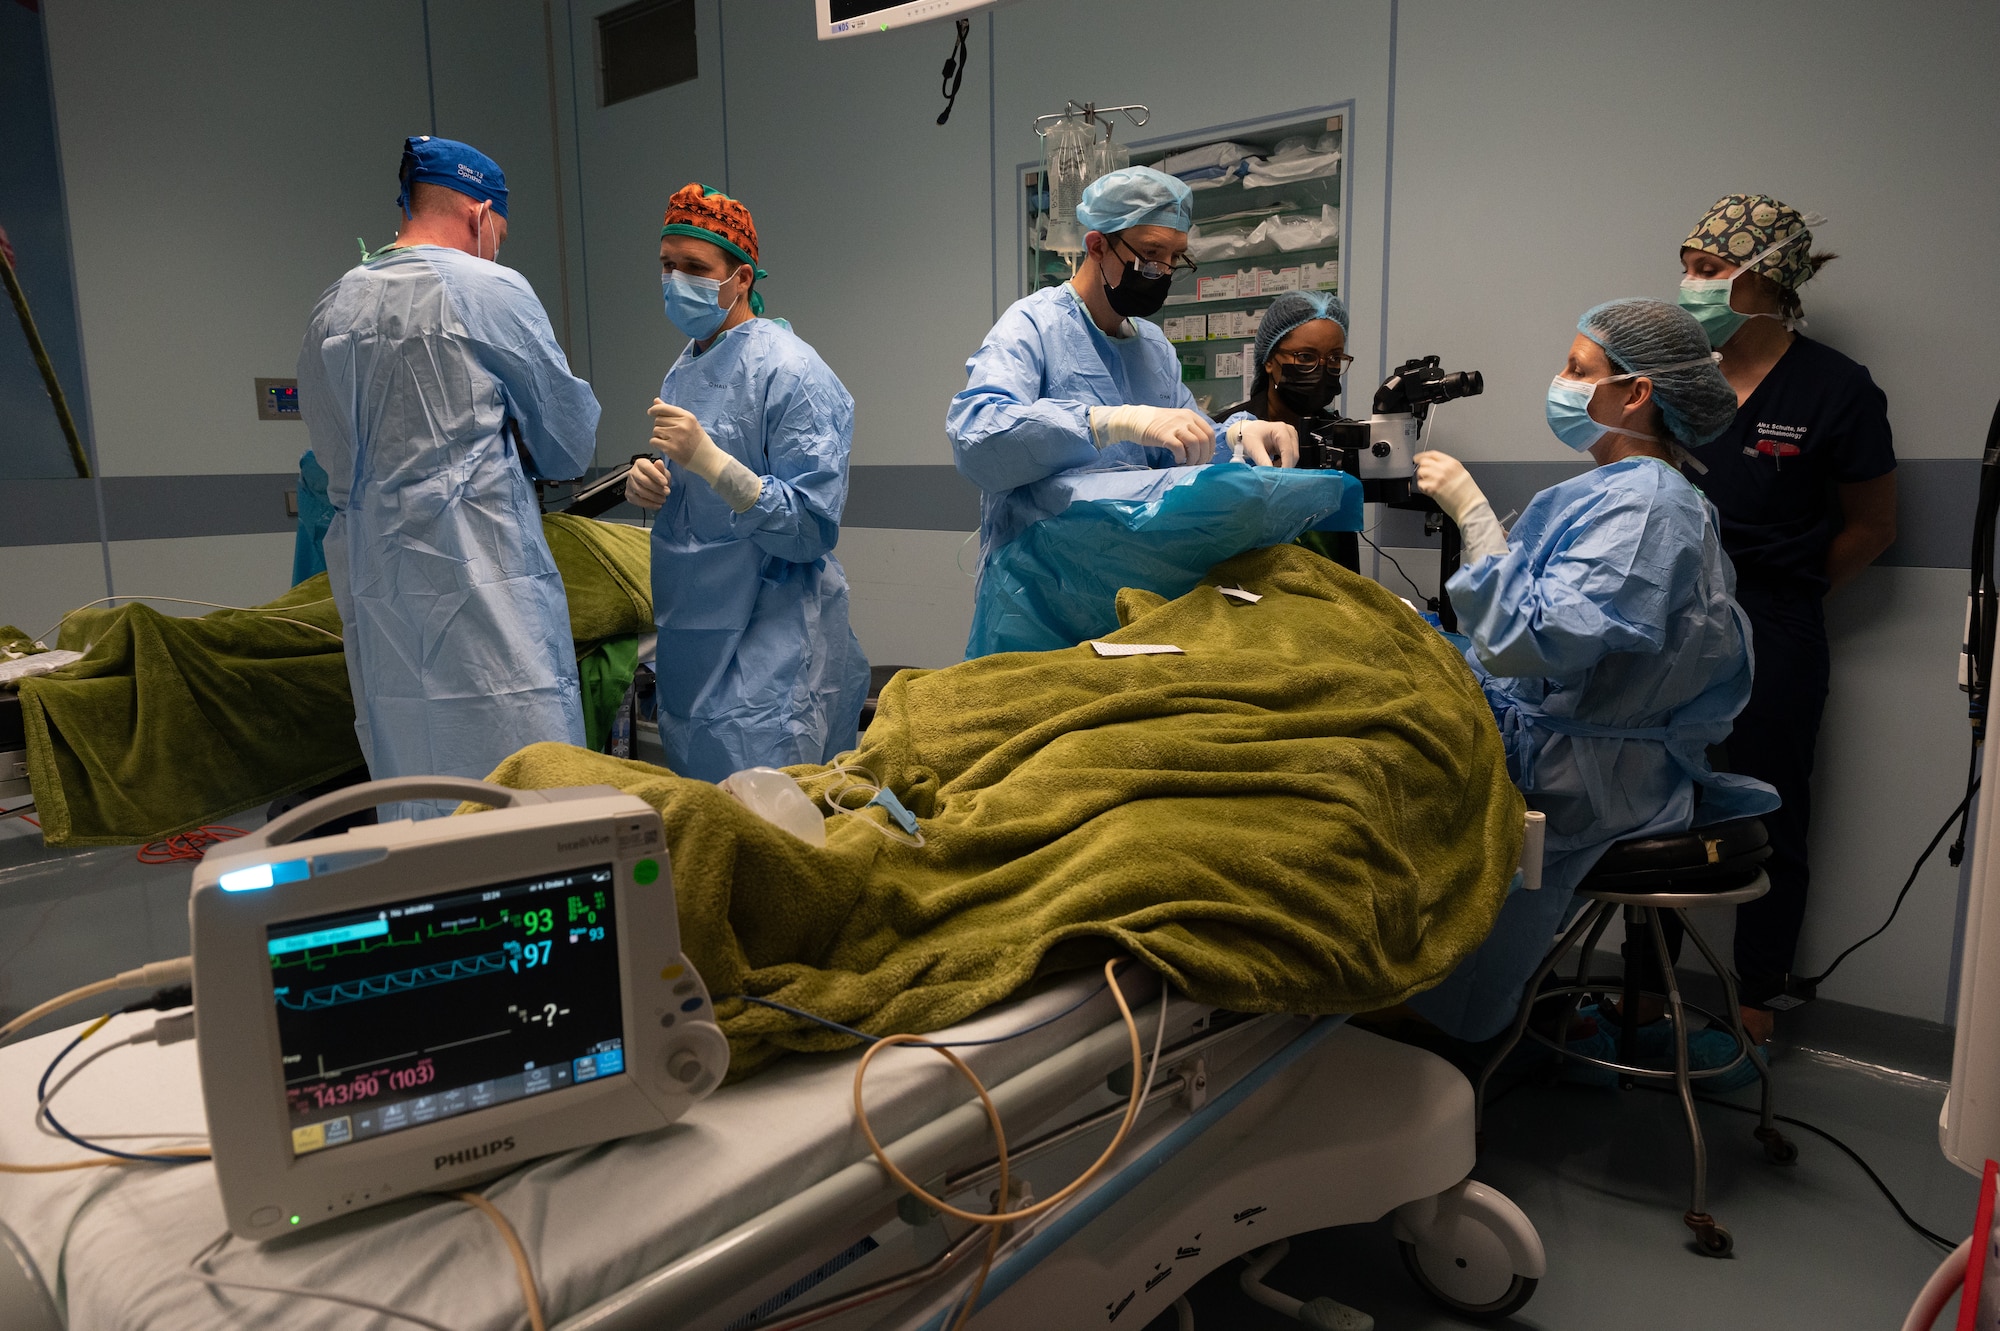 A team of military ophthalmologists discuss surgical approach of manual small incision cataract surgery during a training mission to Regional Hospital Dr. Luis "Chicho" Fabrega in Santiago de Veraguas, Panama, as part of a three-week mission that occurred on July 17, 2023.